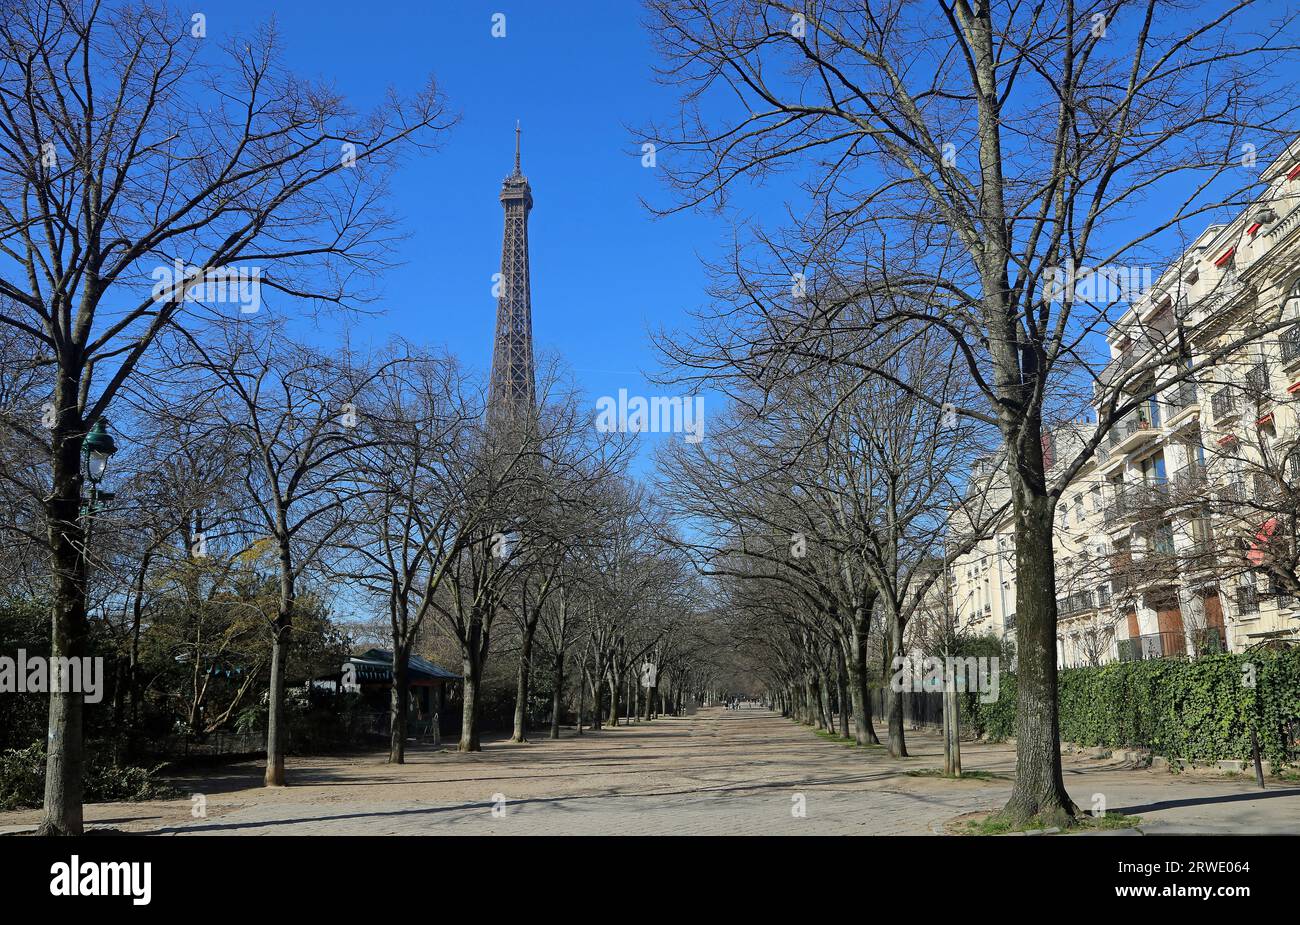 The alley and the tower - Eiffel Tower - Paris, France Stock Photo